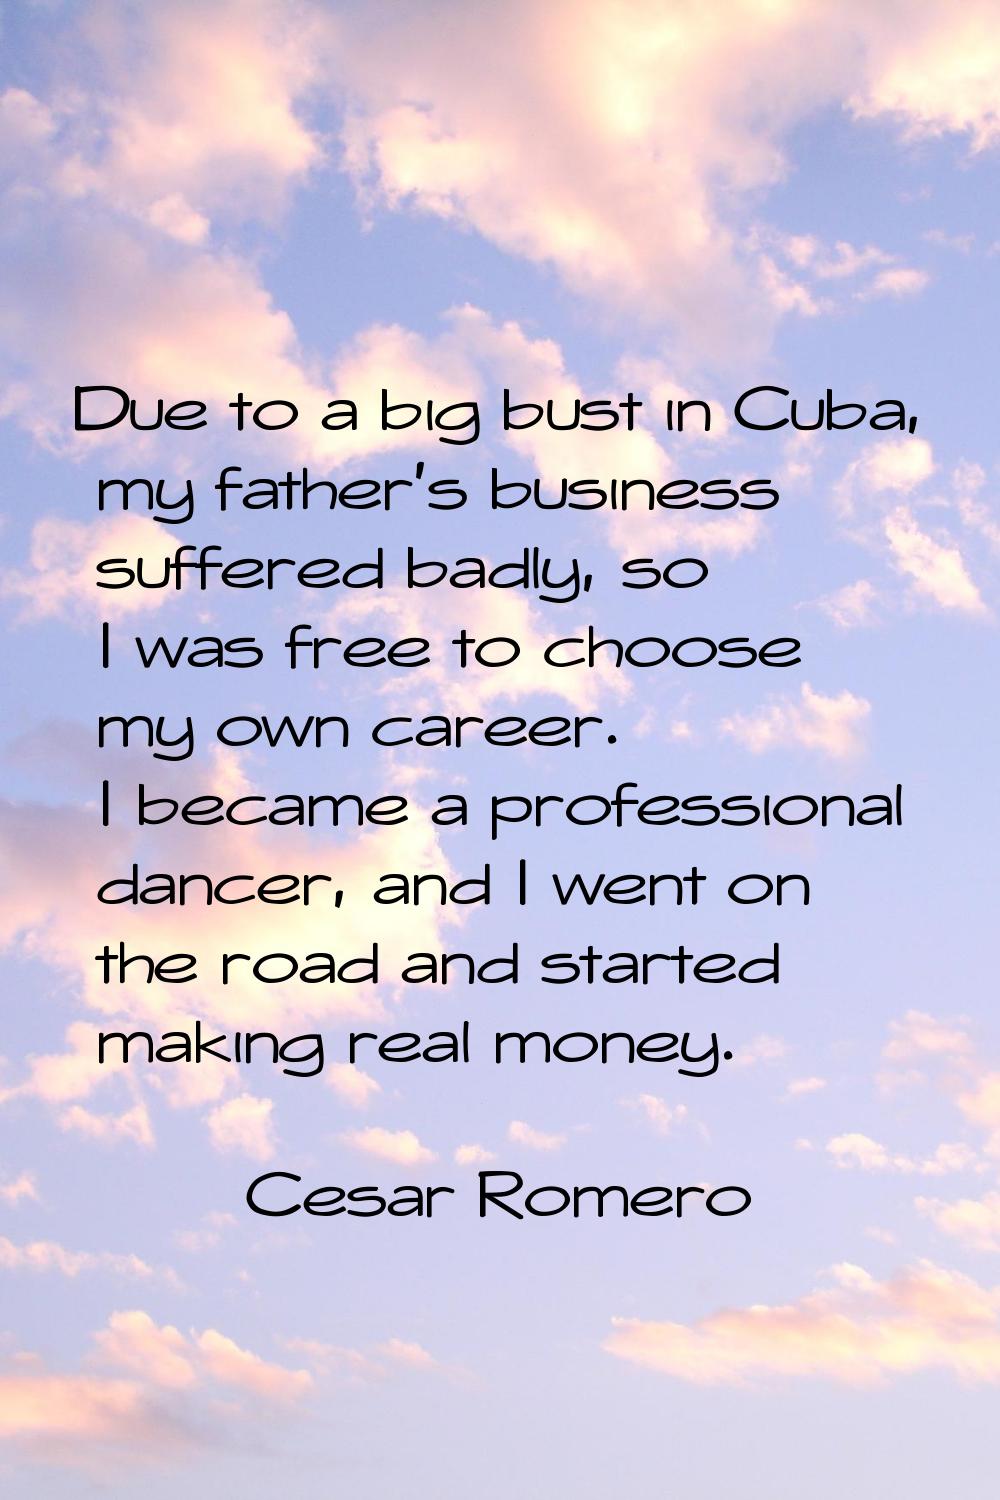 Due to a big bust in Cuba, my father's business suffered badly, so I was free to choose my own care